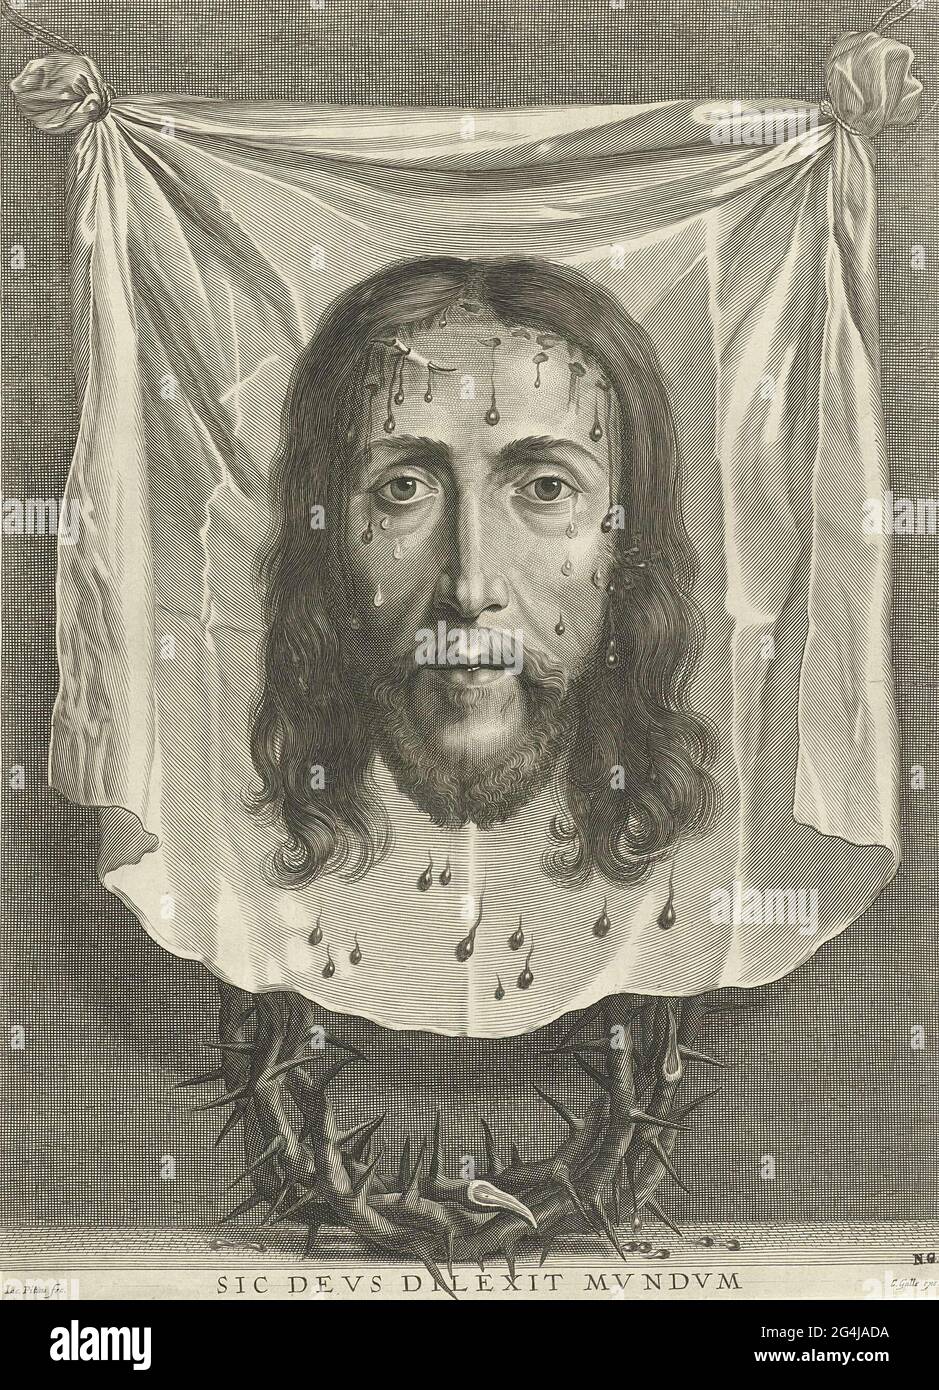 The sweat cloth of the Holy Veronica on which the imprint of the face of  Christ. Under the canvas the thorns crown. In the margin a caption in Latin  Stock Photo -